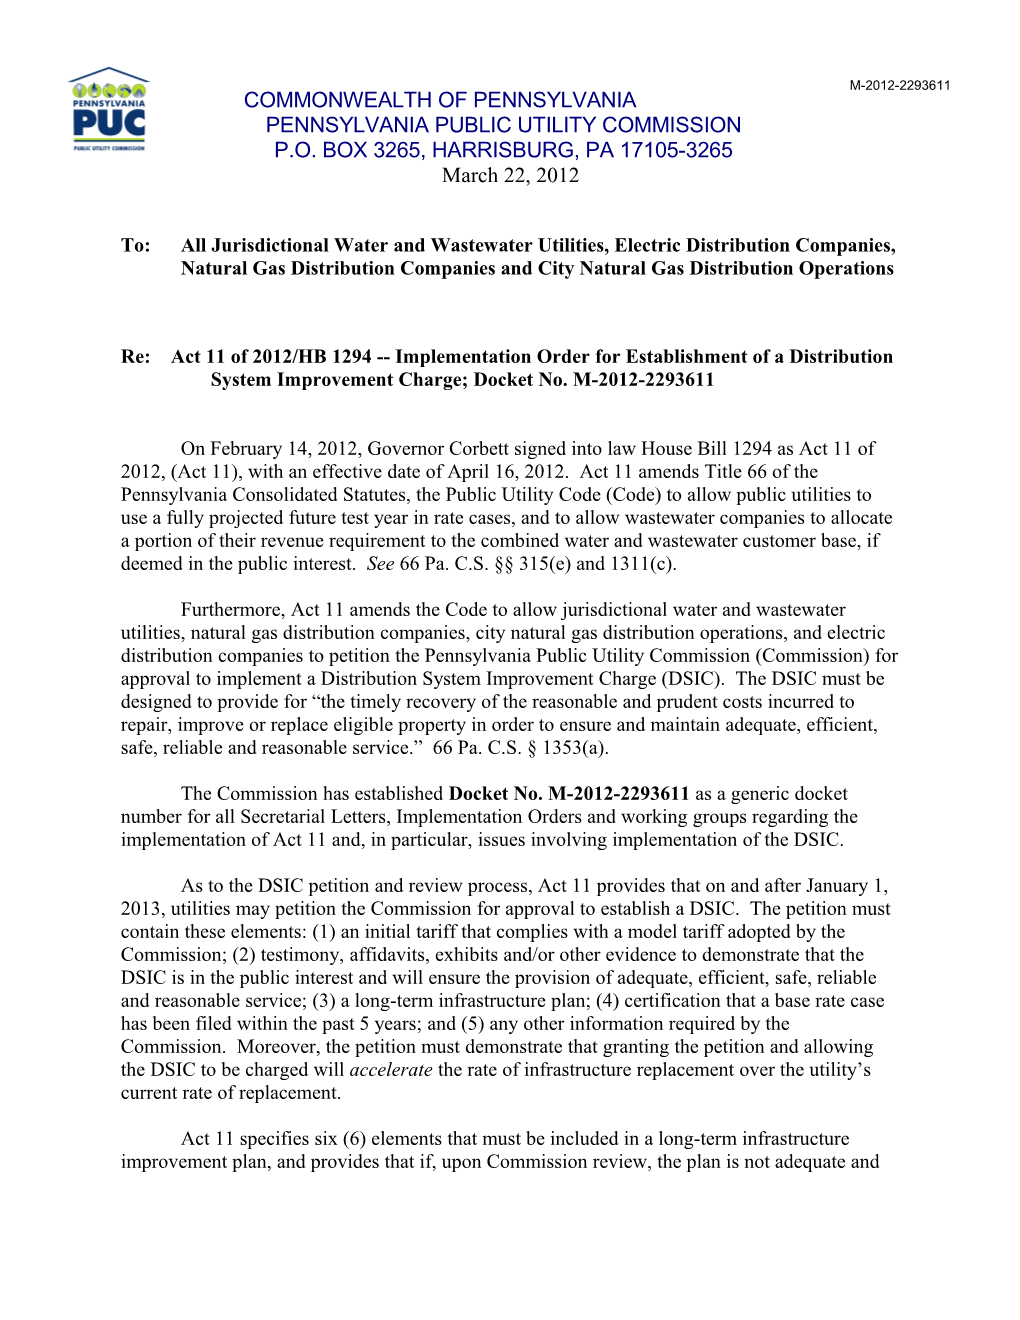 Re: Act 11 of 2012/HB 1294 Implementation Order for Establishment of a Distribution System